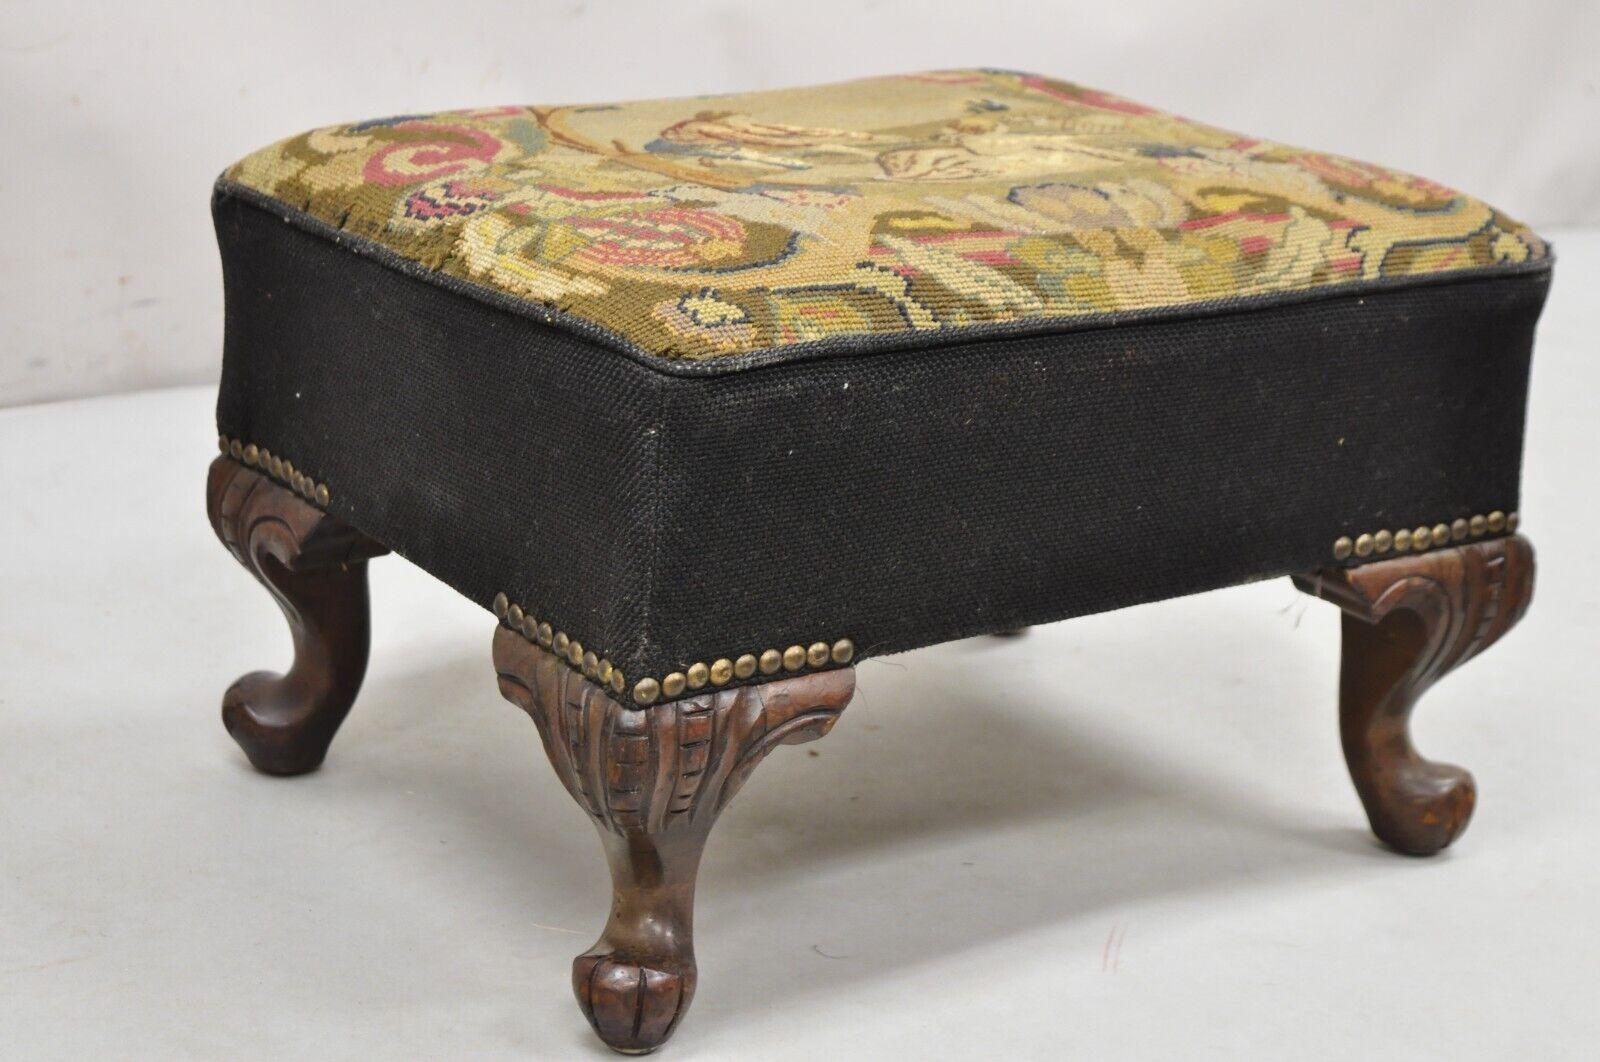 French Provincial Antique French Figural Needlepoint Box Footstool Ottoman on Mahogany Legs For Sale